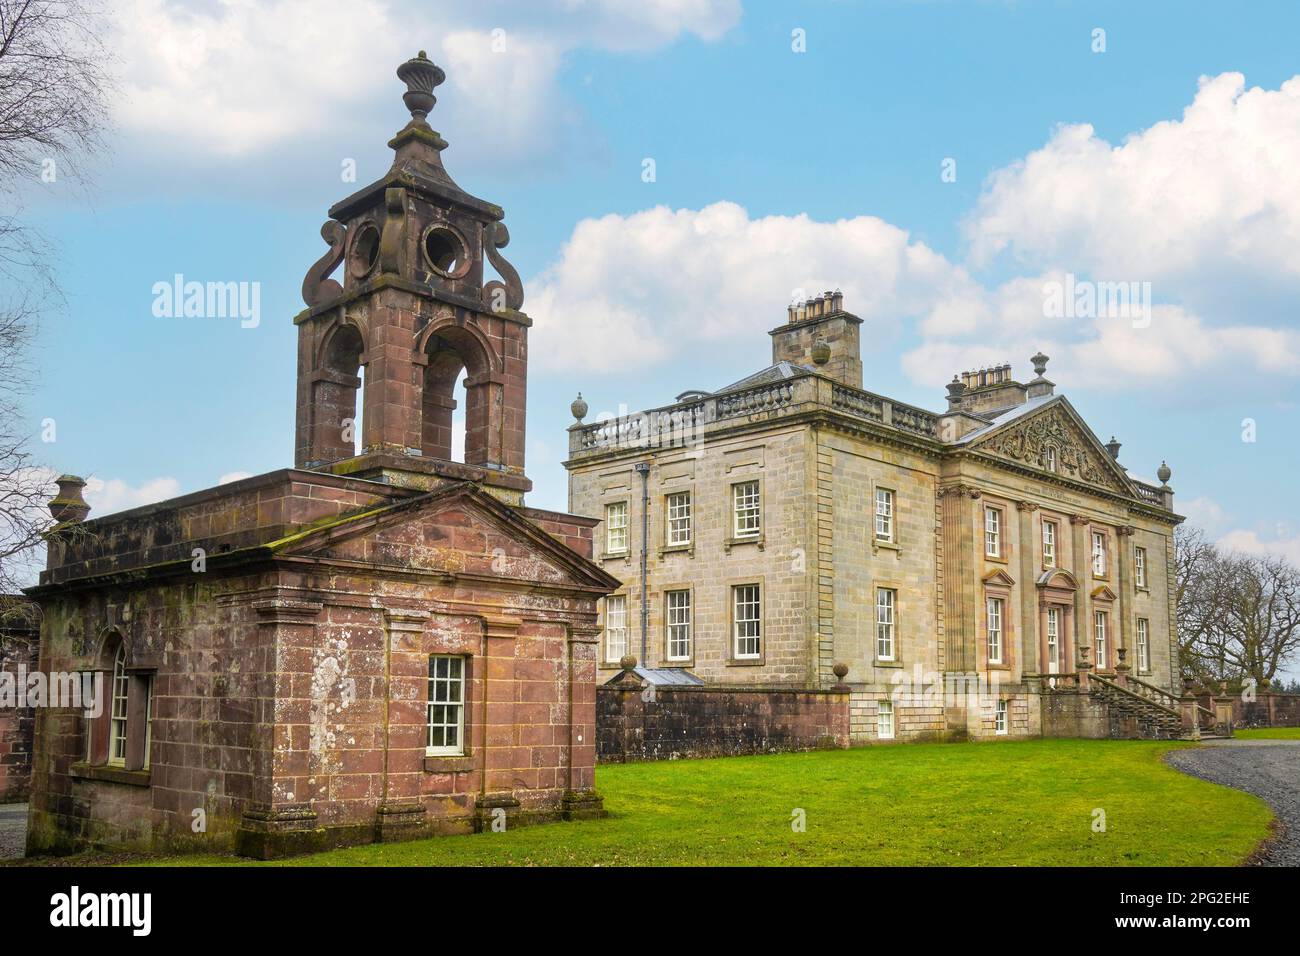 Boswell's Auchinleck House, an 18th century mansion designed by Robert Adam and Thomas Boswell, to be the family house of the Auchinleck Estate, Stock Photo